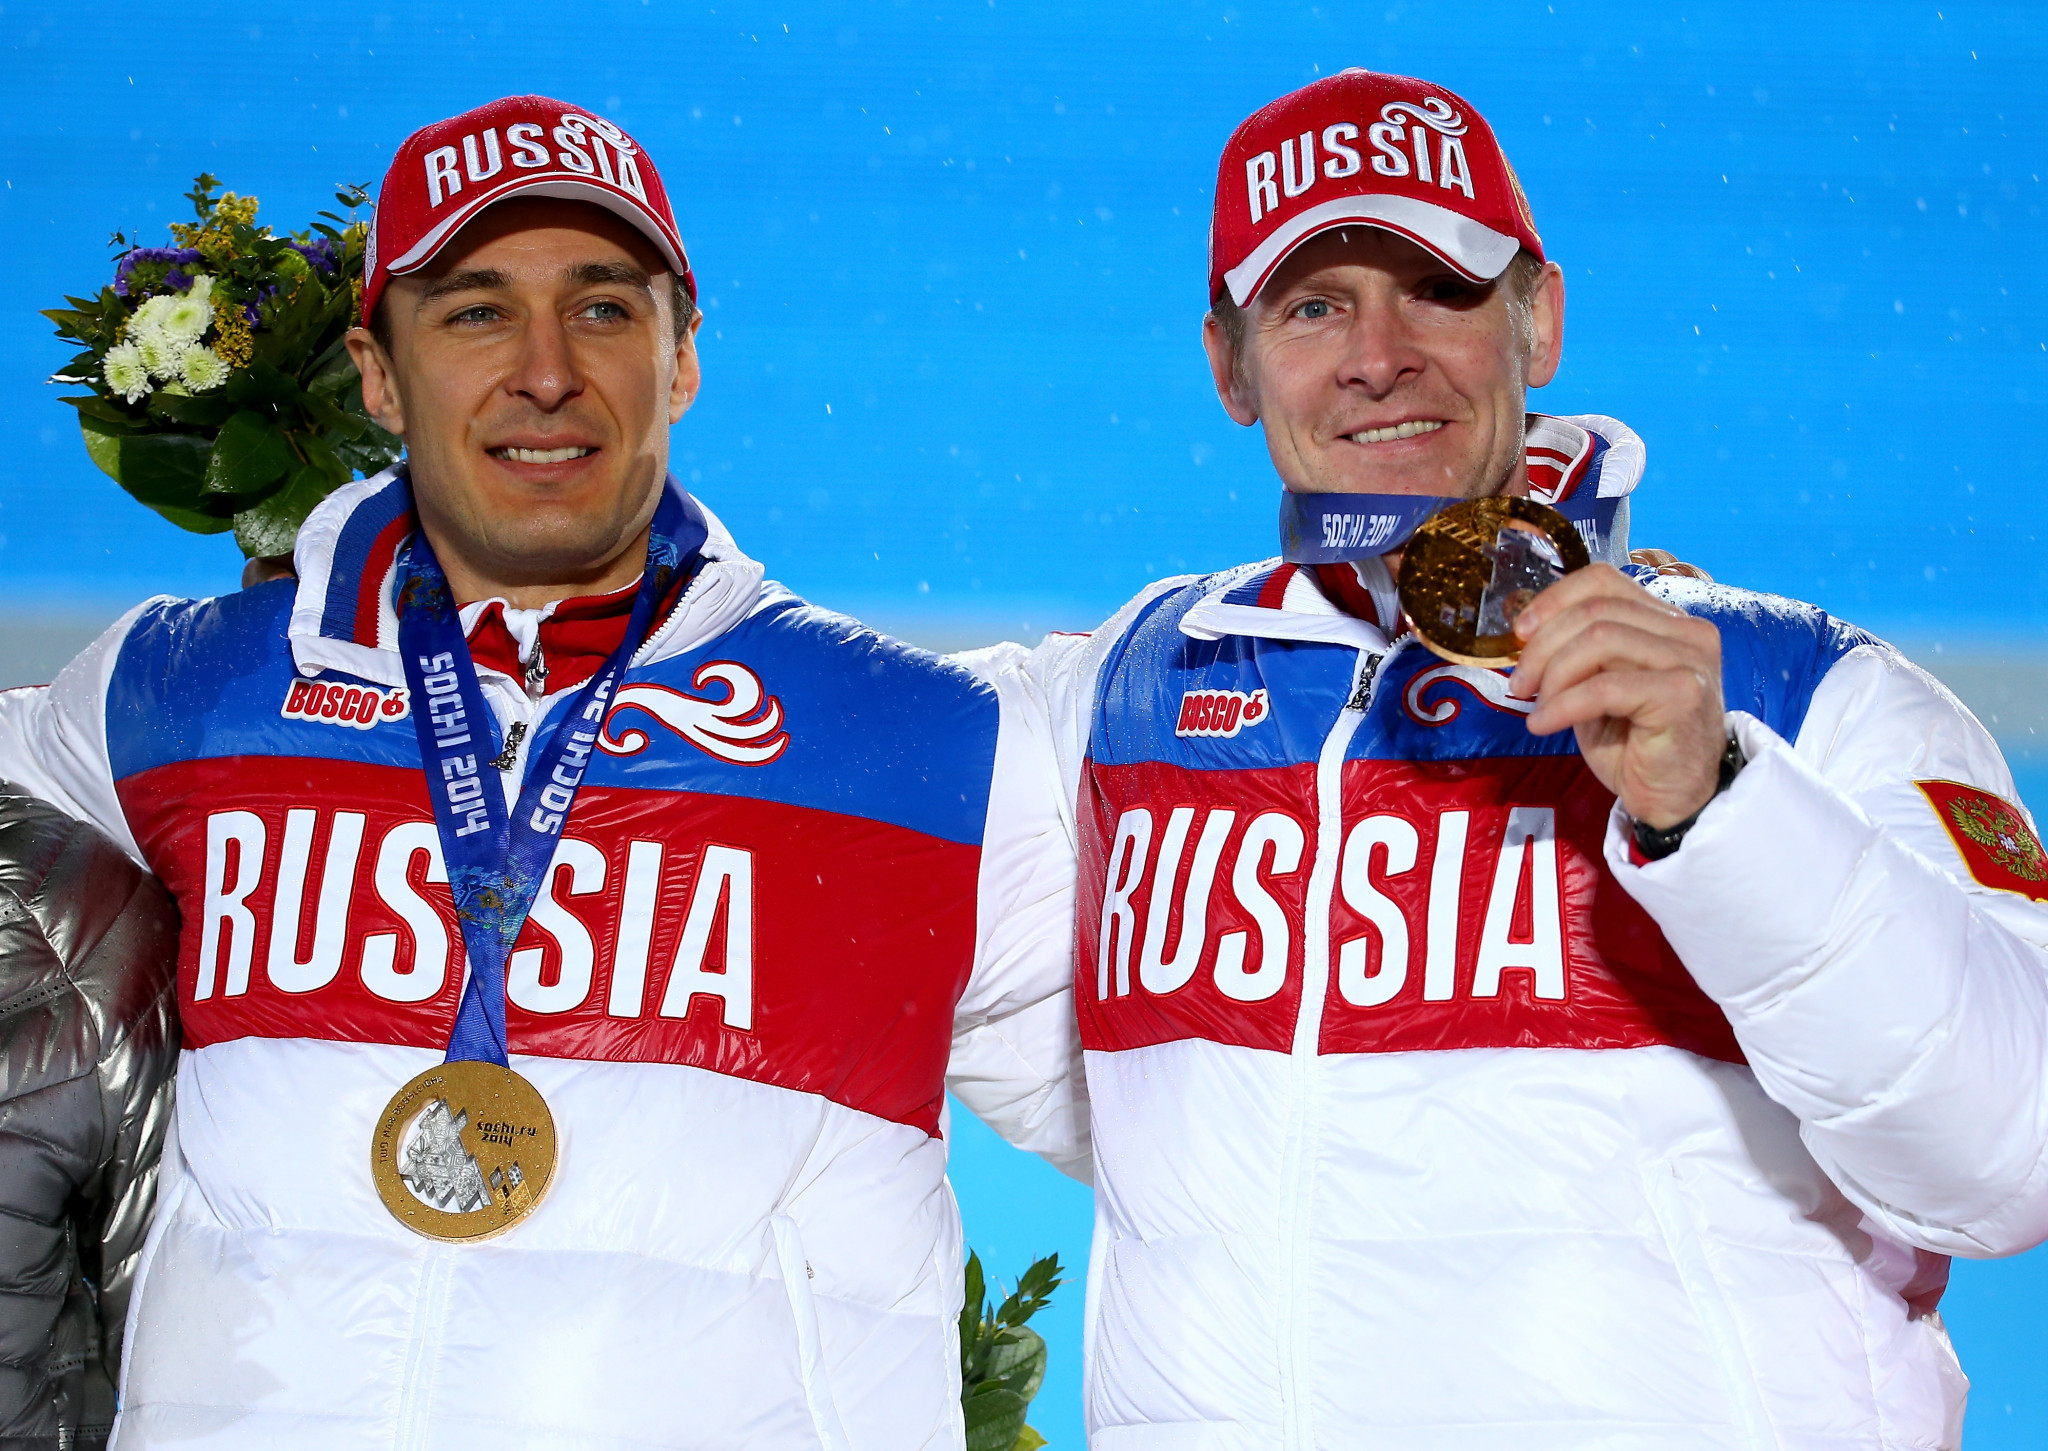 Russian bobsledder Zubkov claims will only return Olympic gold medals after IOC ask him personally 